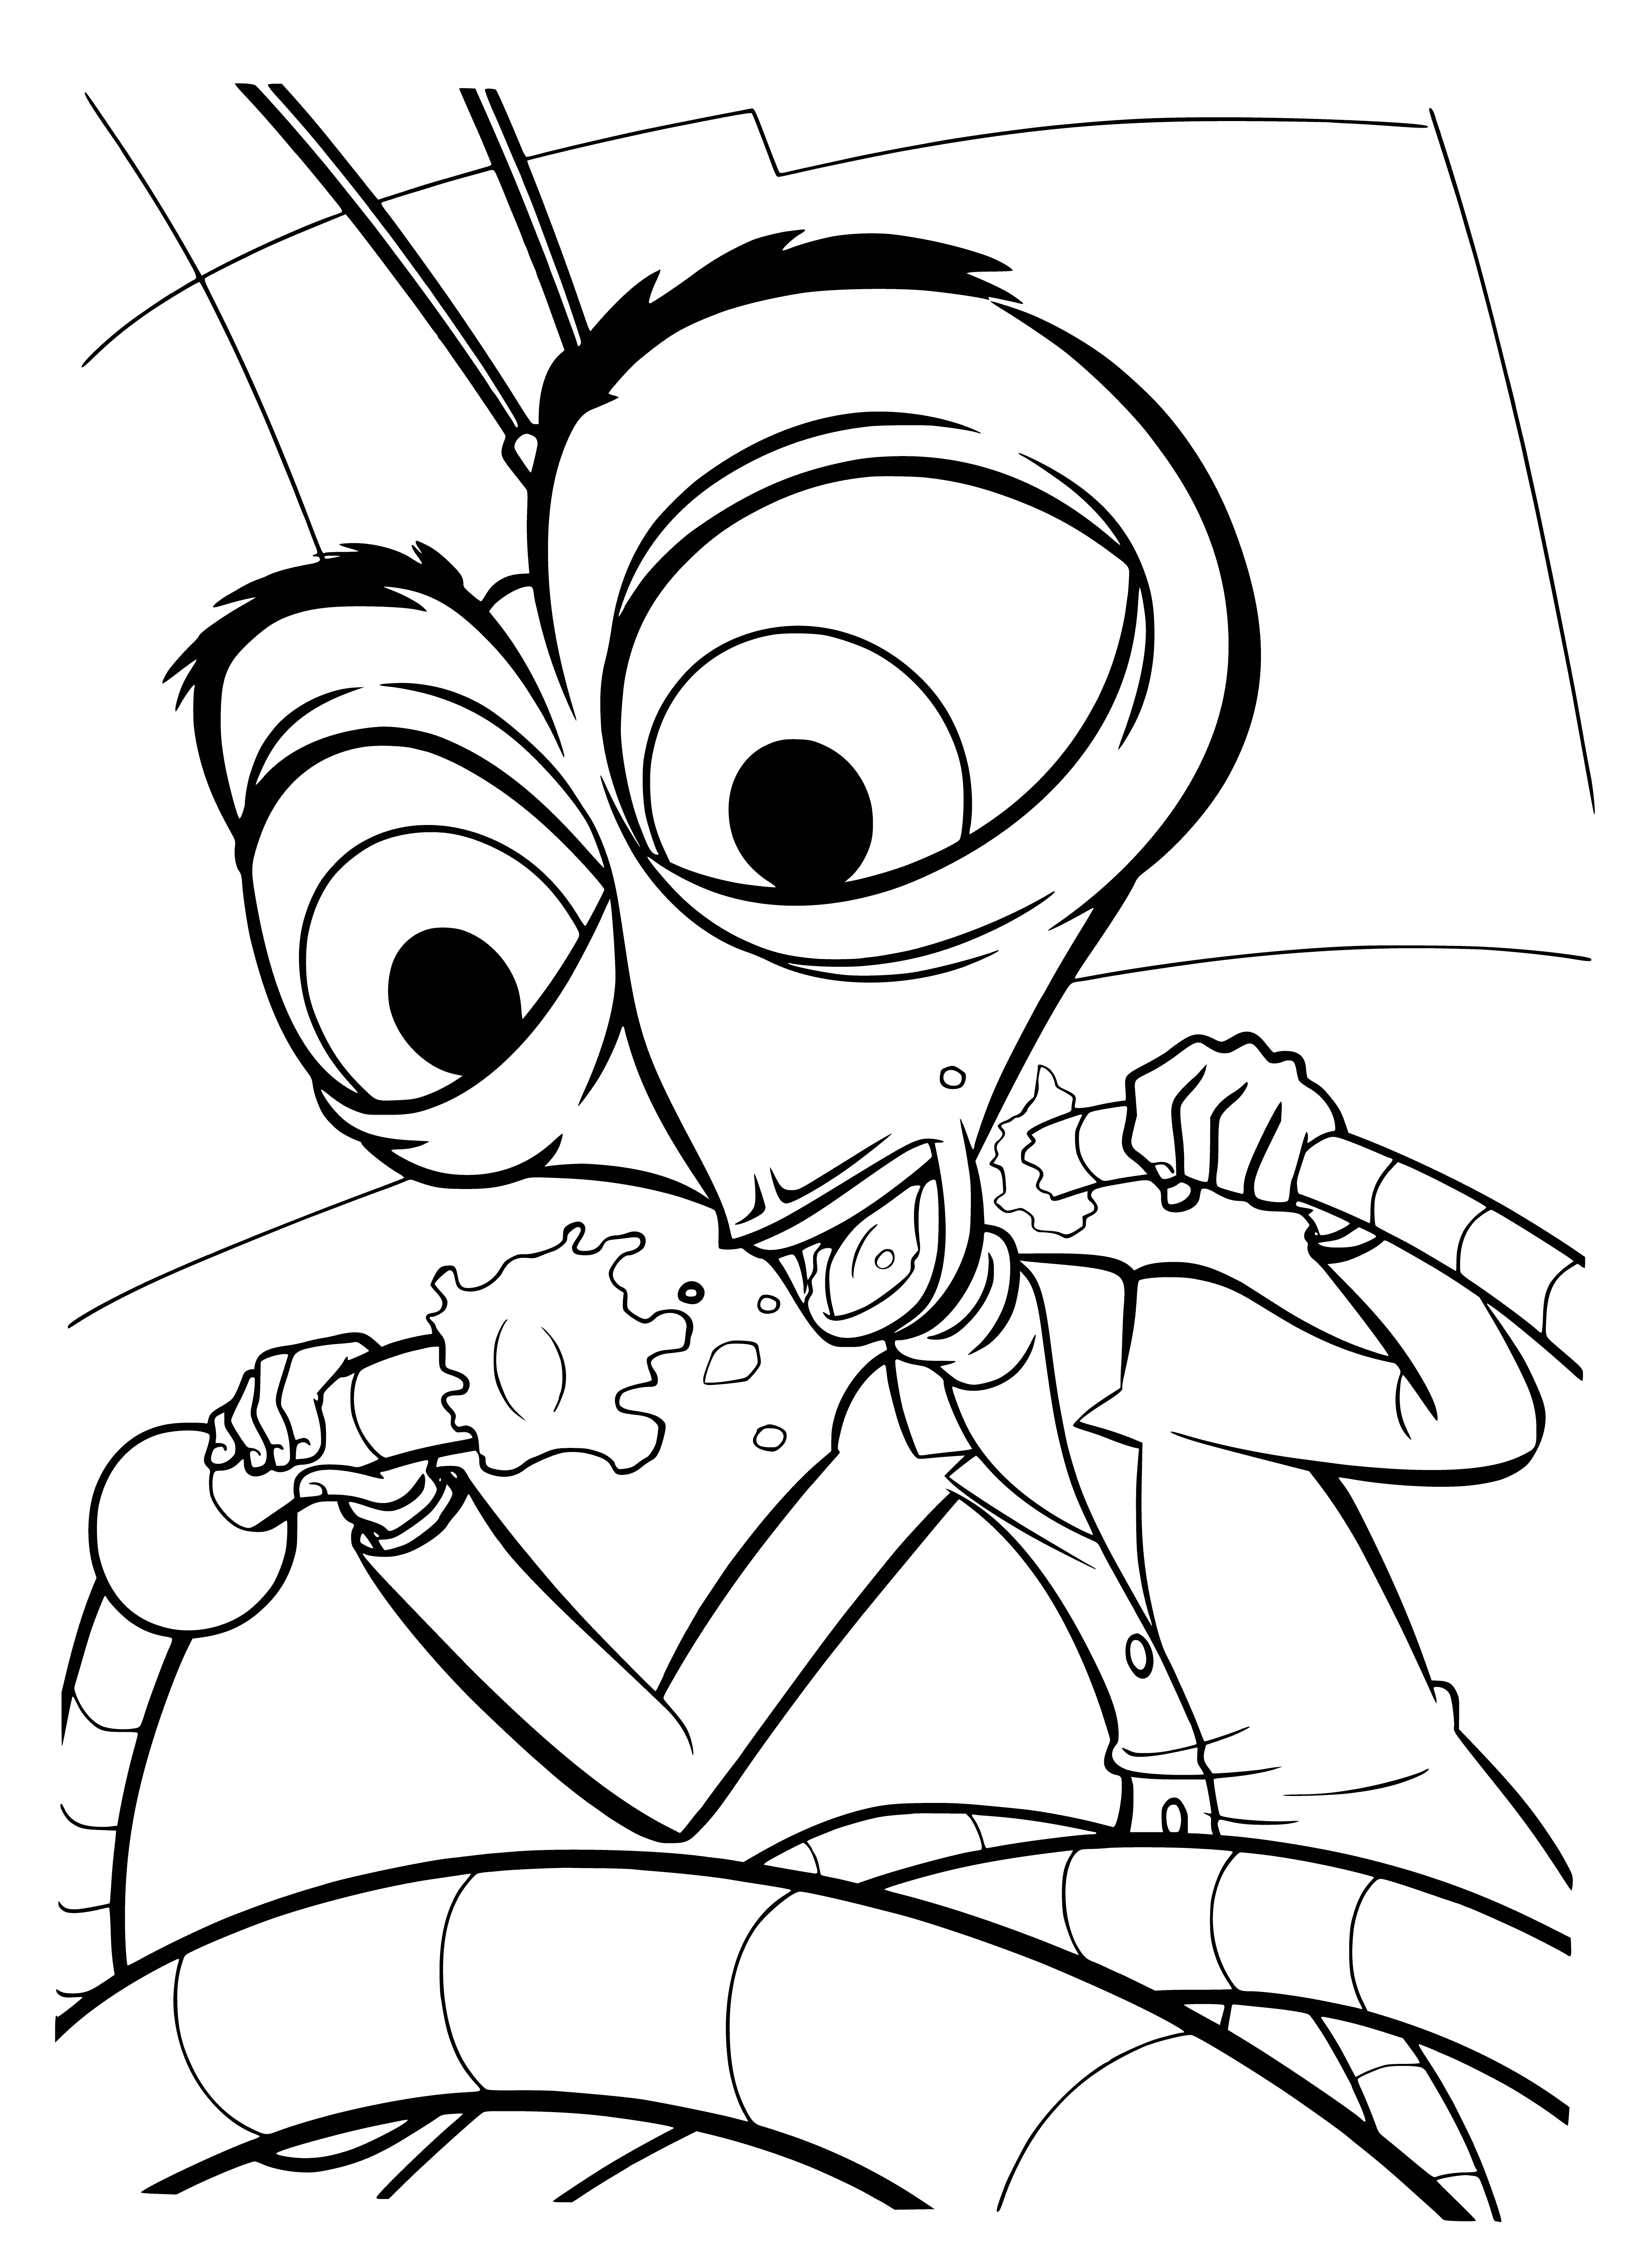 coloring page: A large, purple cockroach with green eyes, antennae, and a white lab coat holds a big green brain in its right hand.